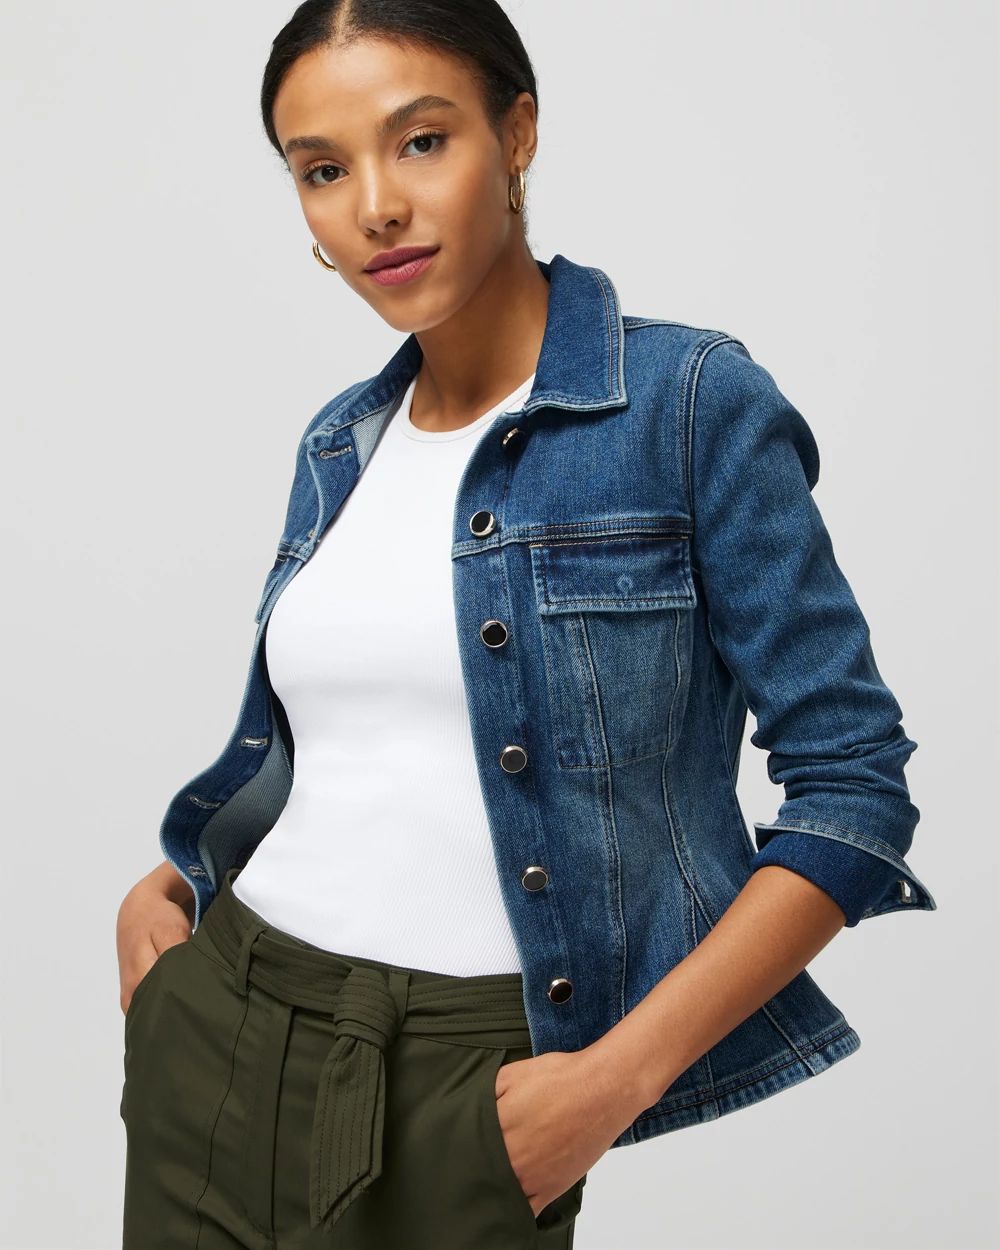 Petite Fit & Flair Denim Shacket click to view larger image.